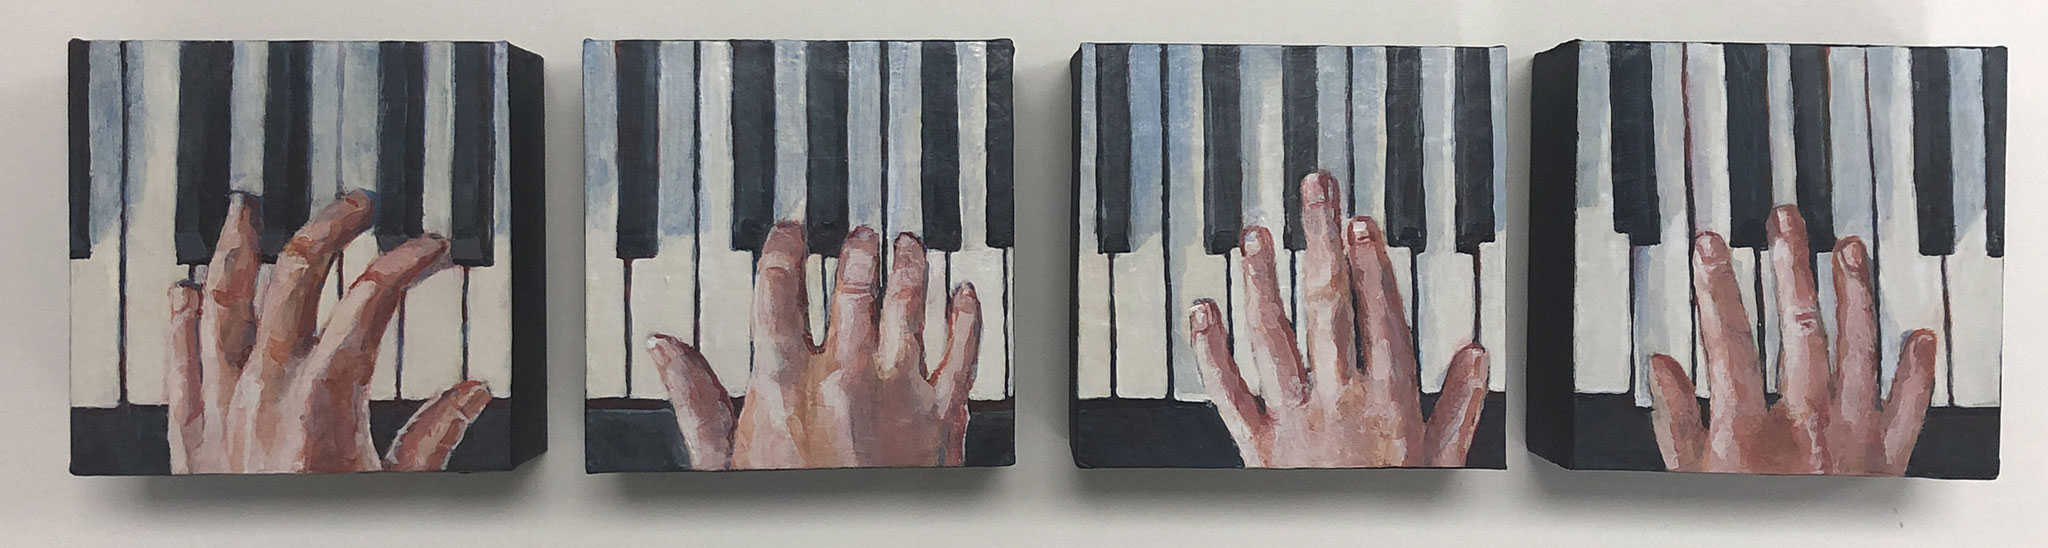 FOUR HANDED (4 pieces) 4 X4 X 1.5 acrylic on board 